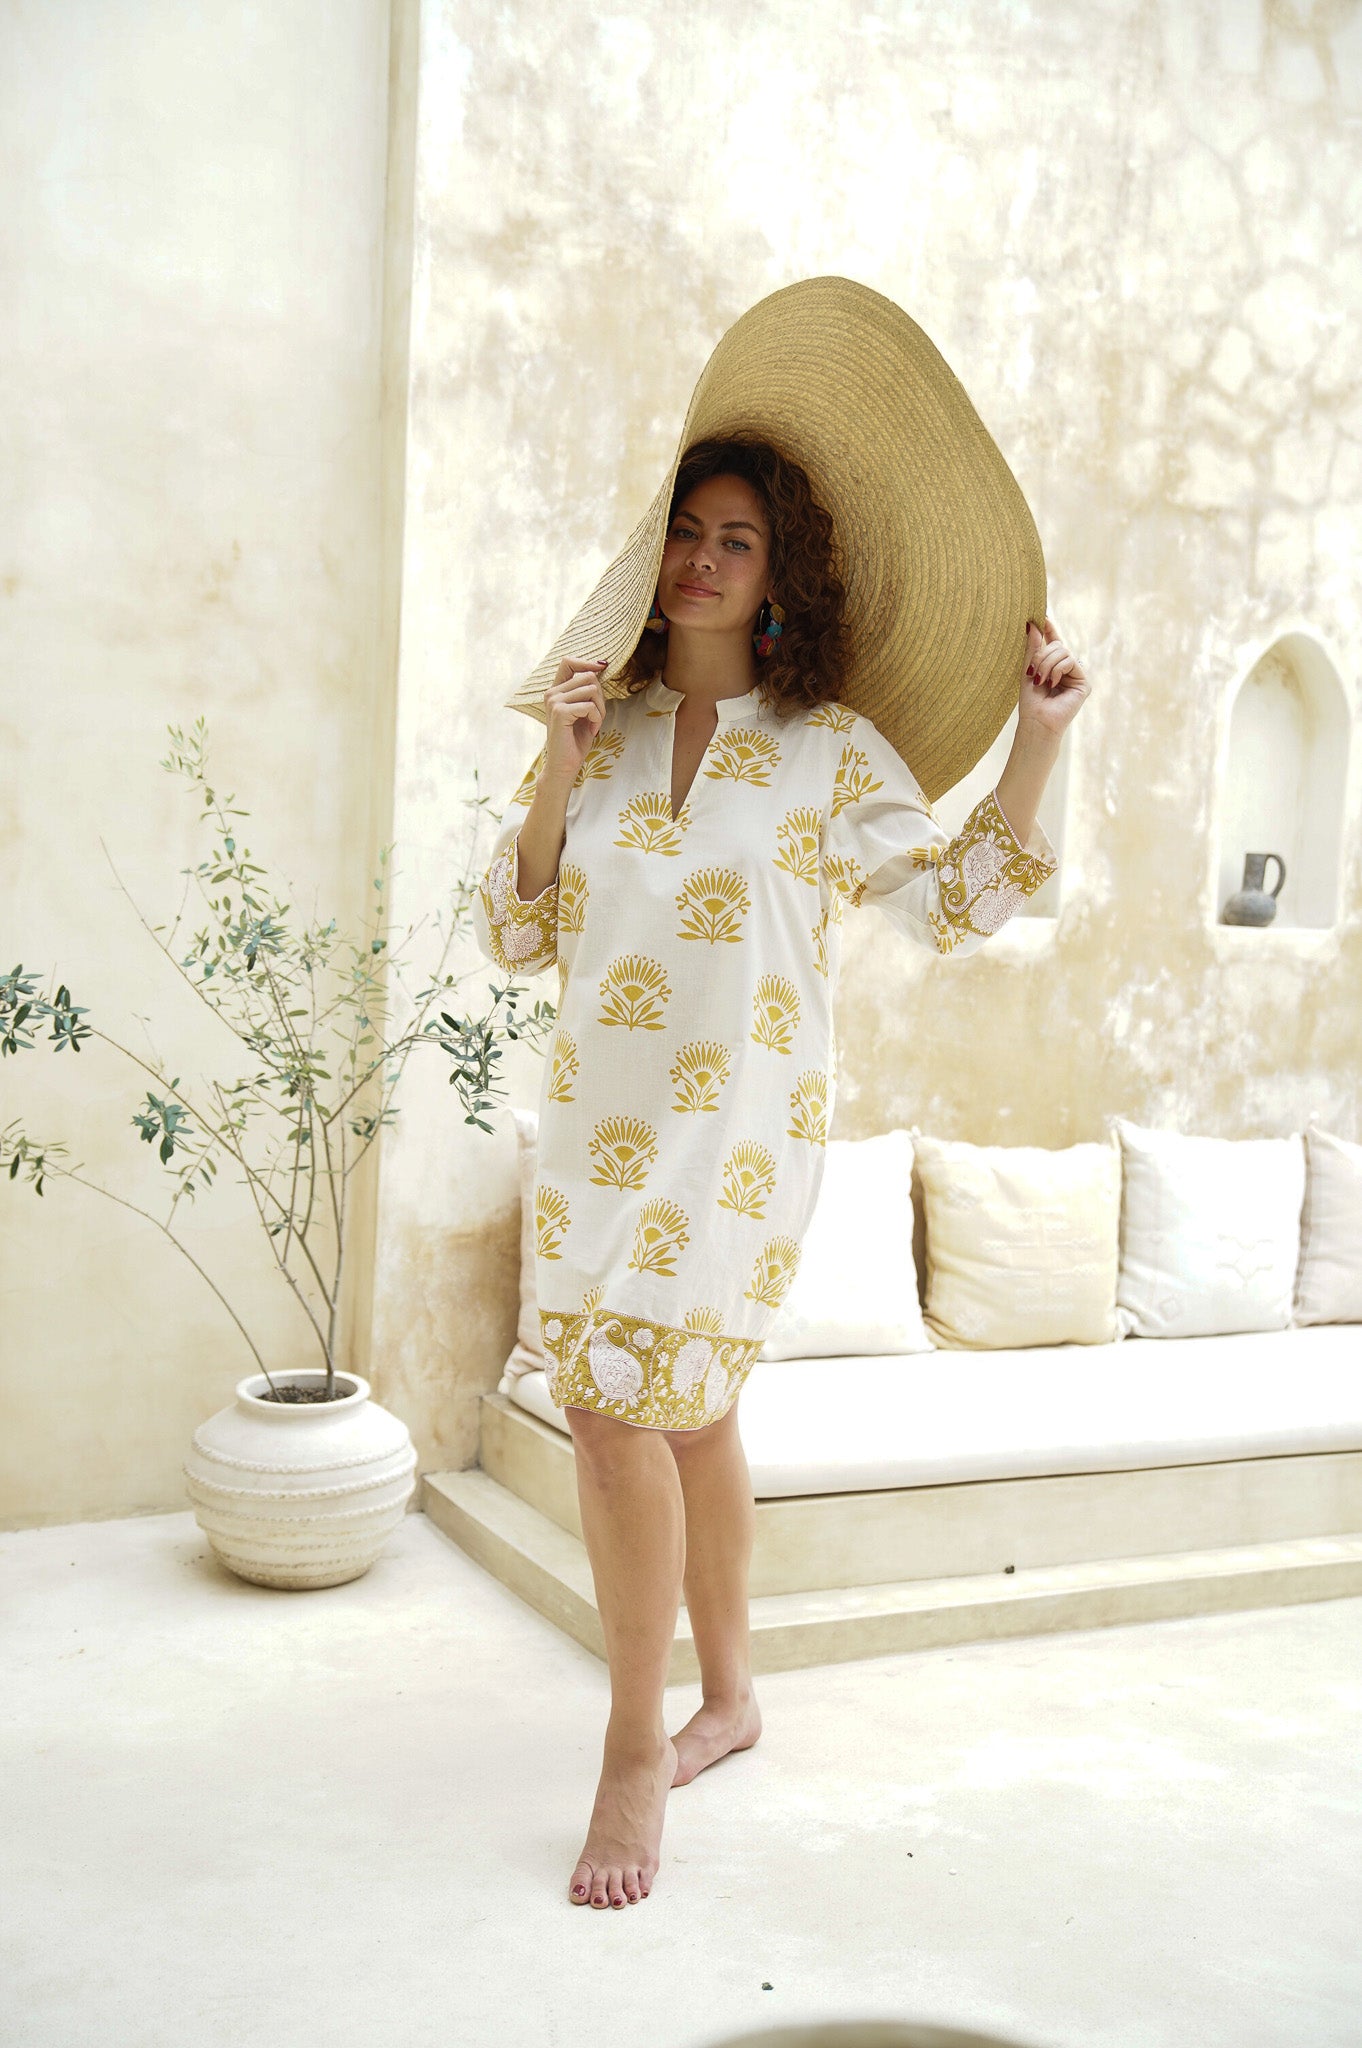 Capture the essence of summer in our yellow floral short dress. Stylish and irresistible!